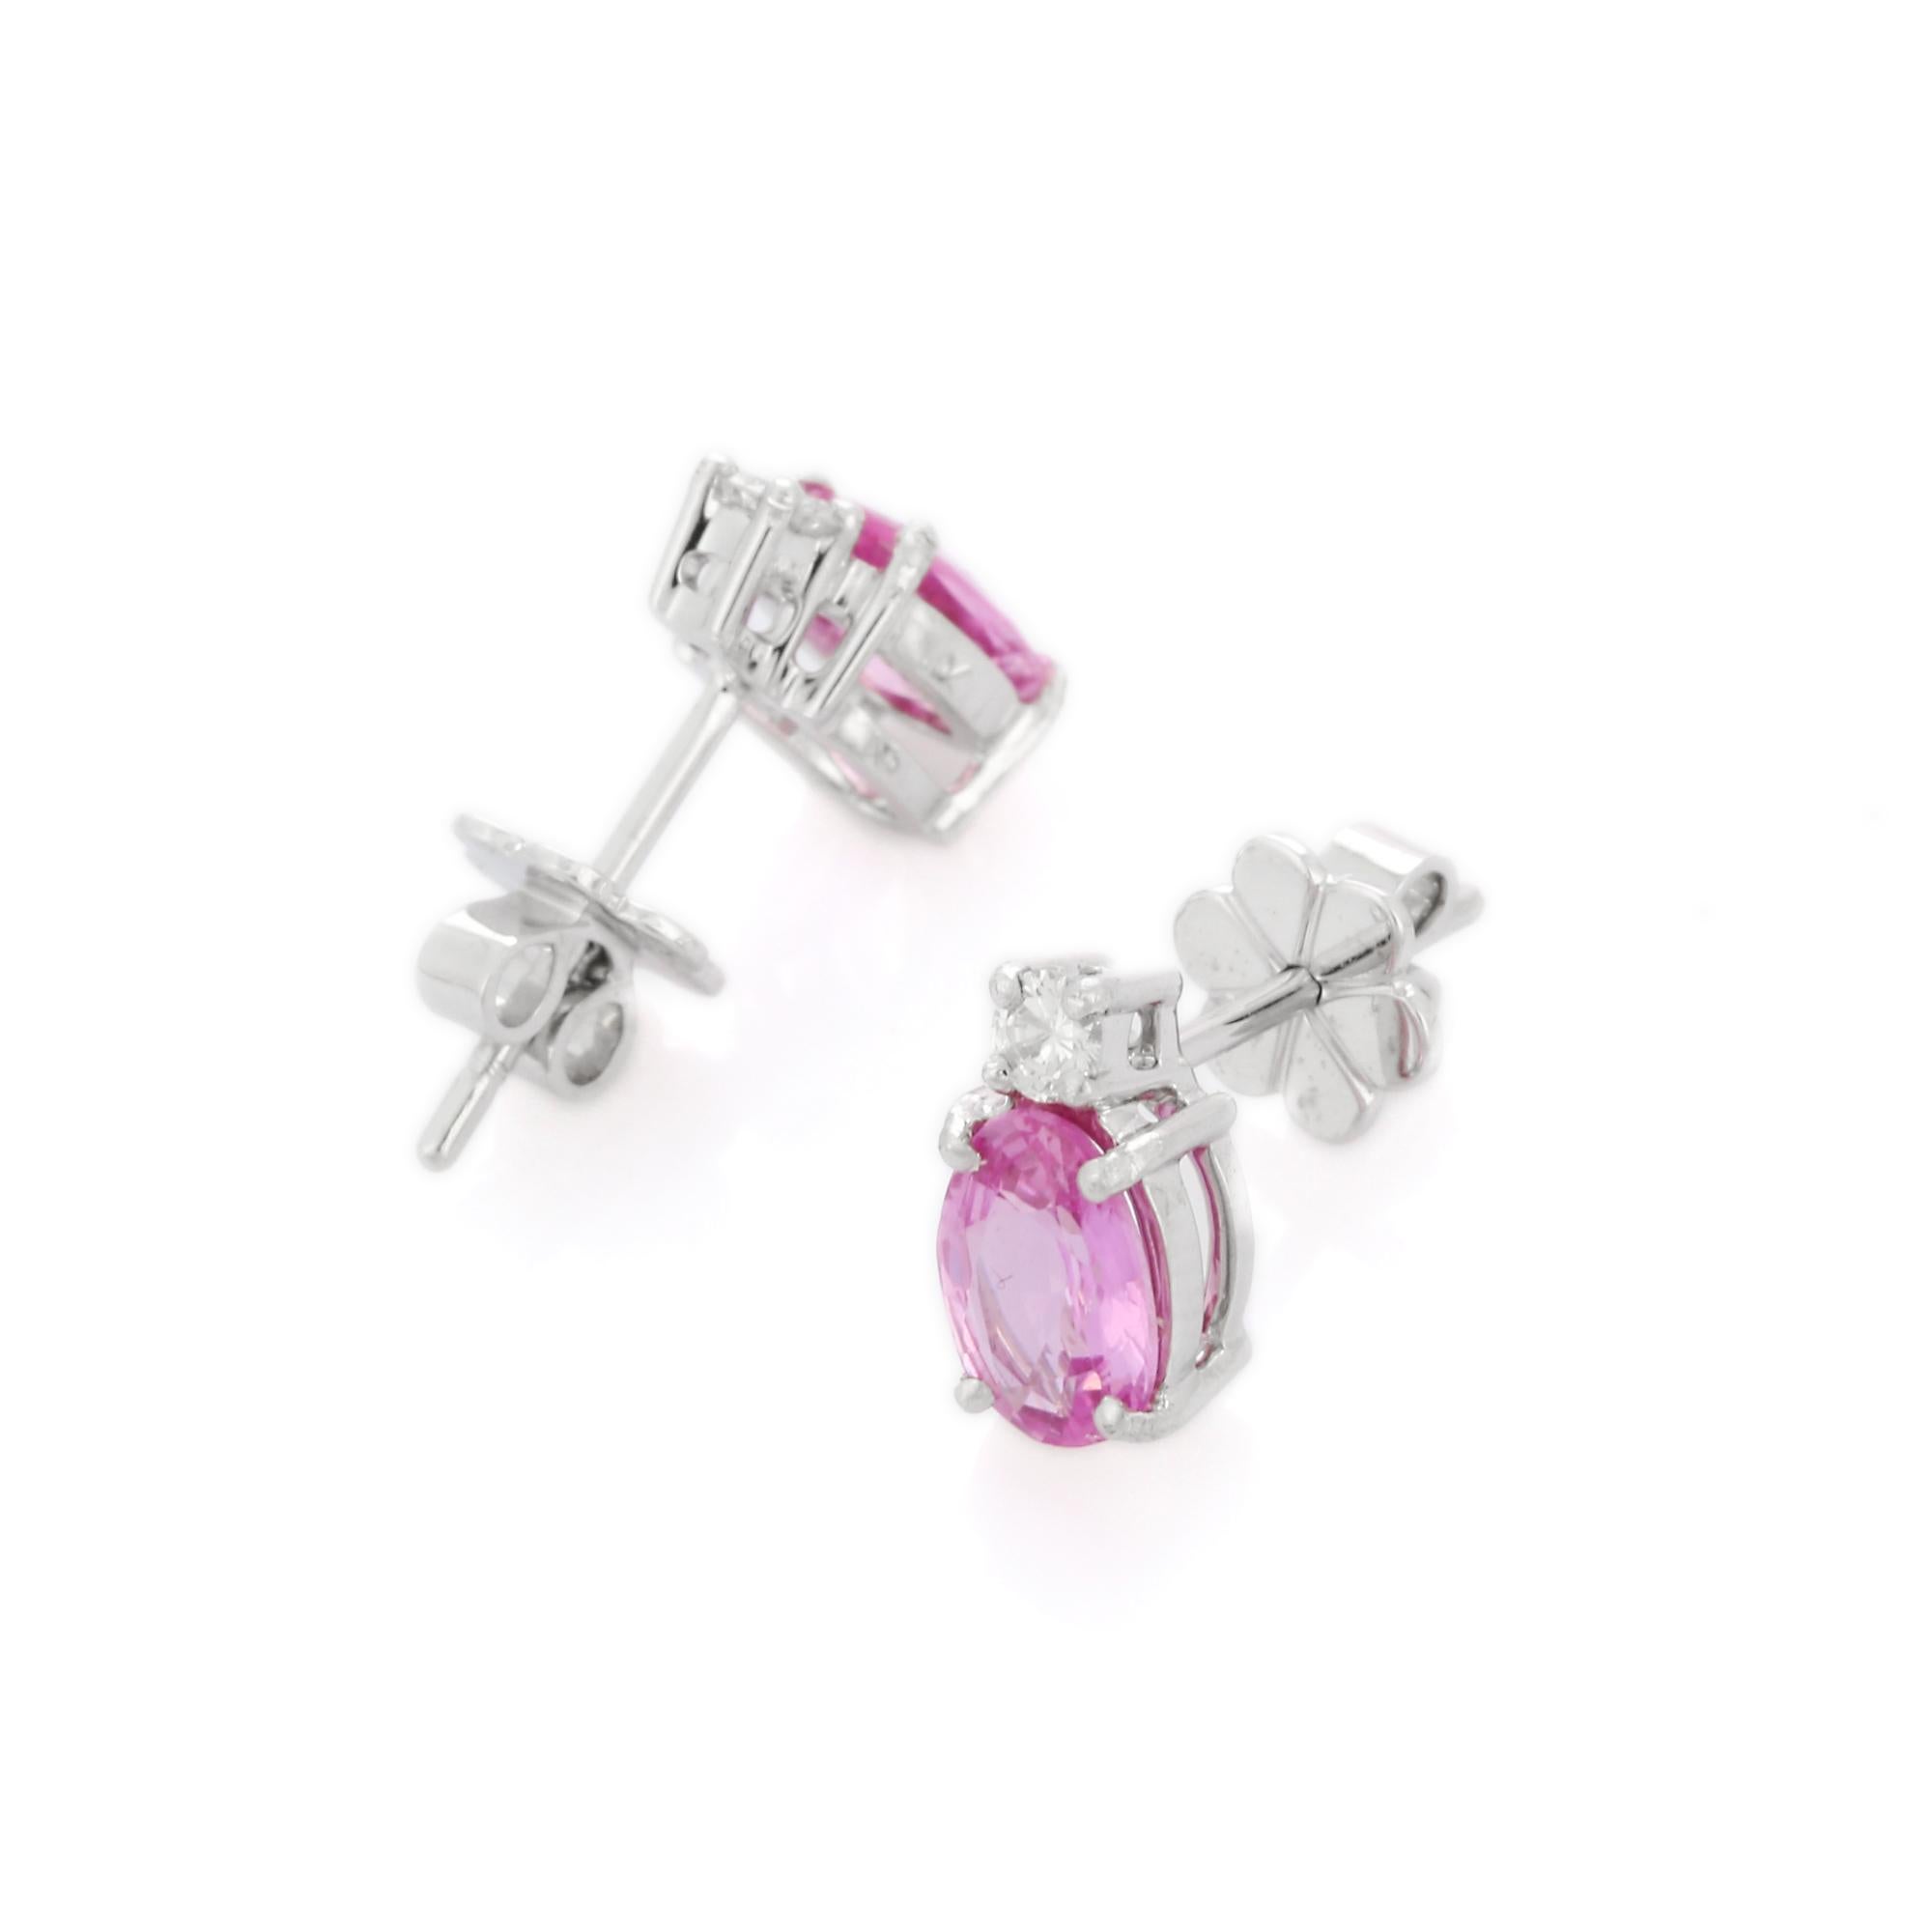 Art Deco 1.48 Carat Prong Set Pink Sapphire Diamond Stud Earrings in 18K Solid White Gold For Sale